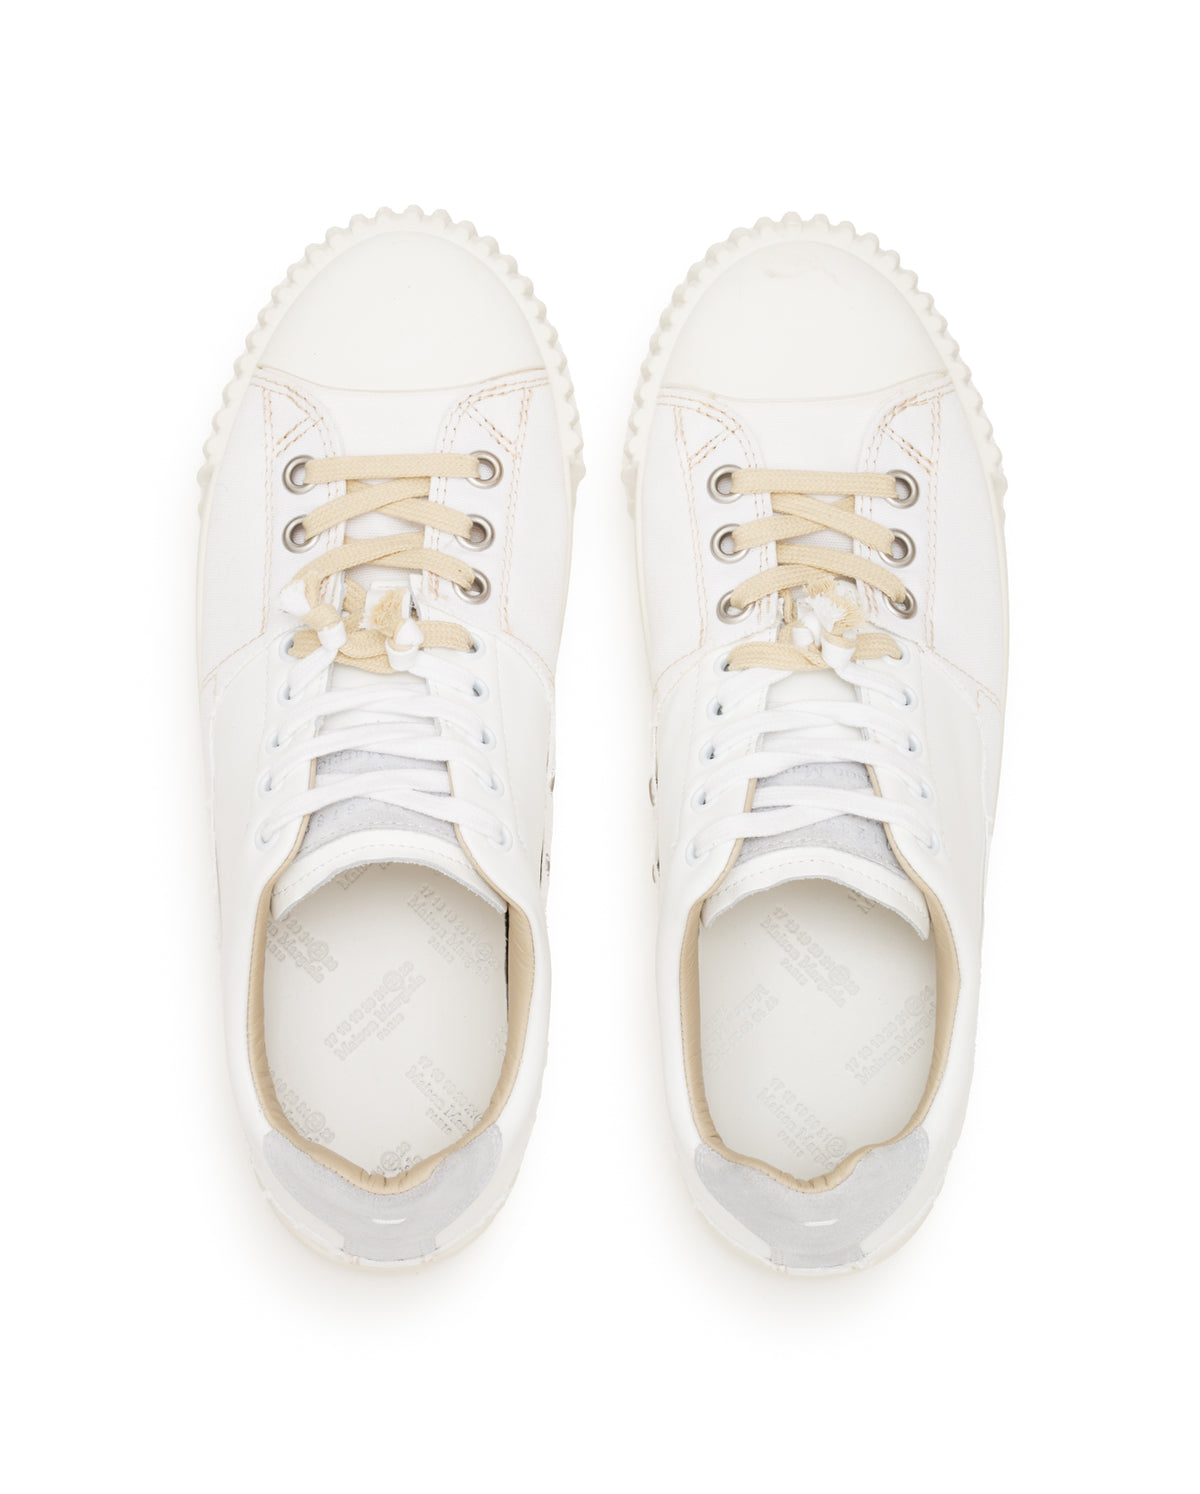 New Evolution Low Top Sneakers - White